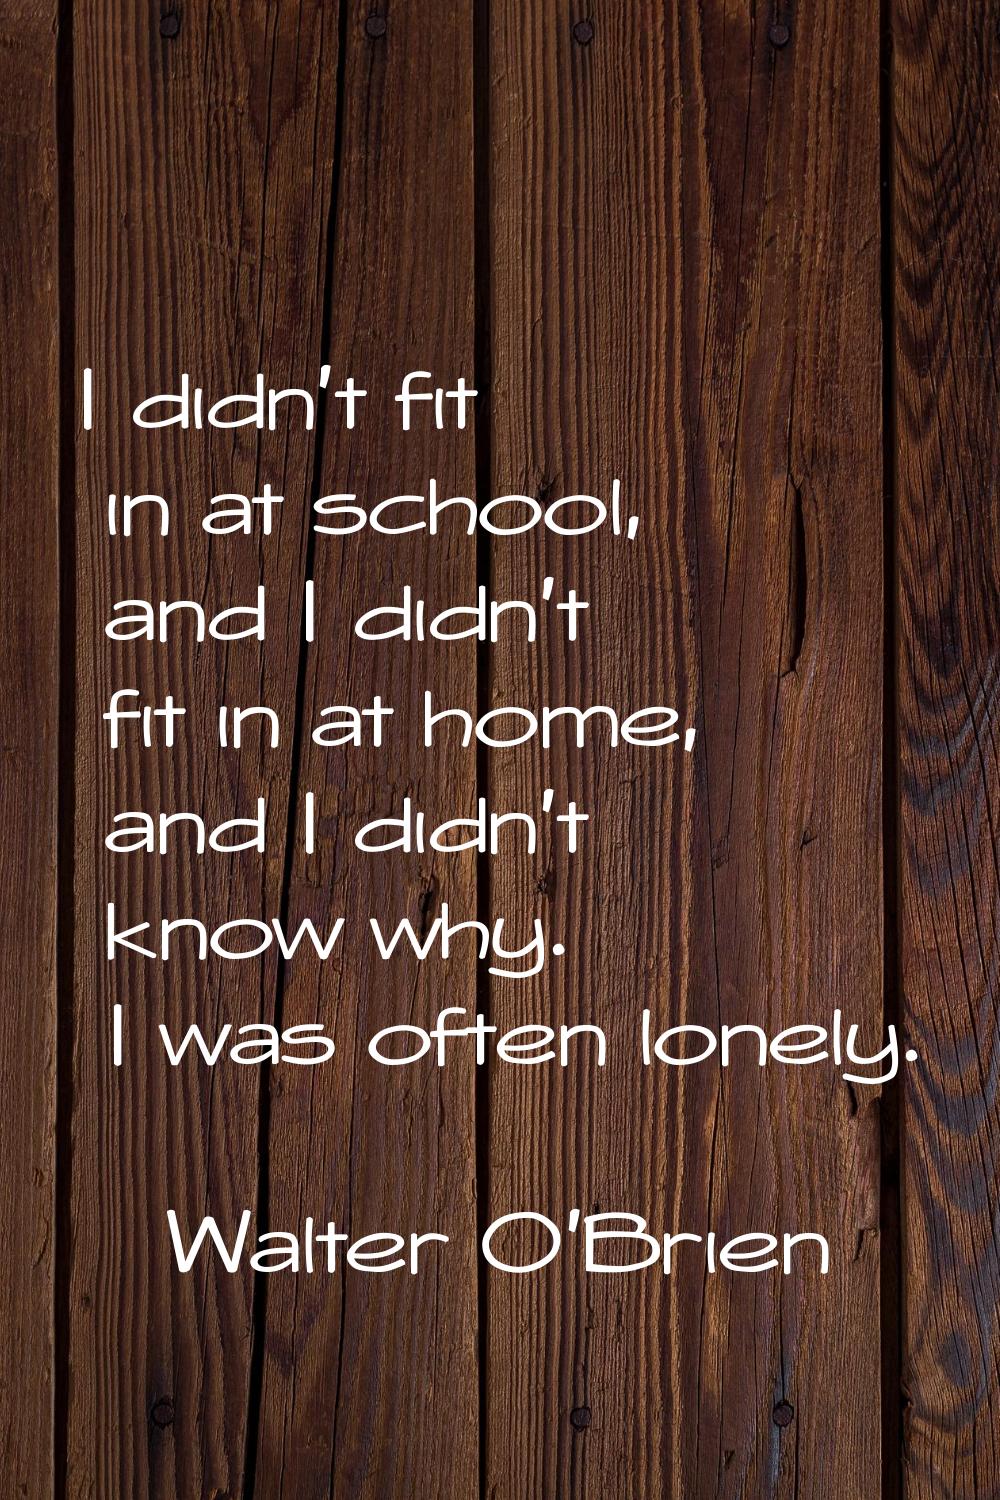 I didn't fit in at school, and I didn't fit in at home, and I didn't know why. I was often lonely.